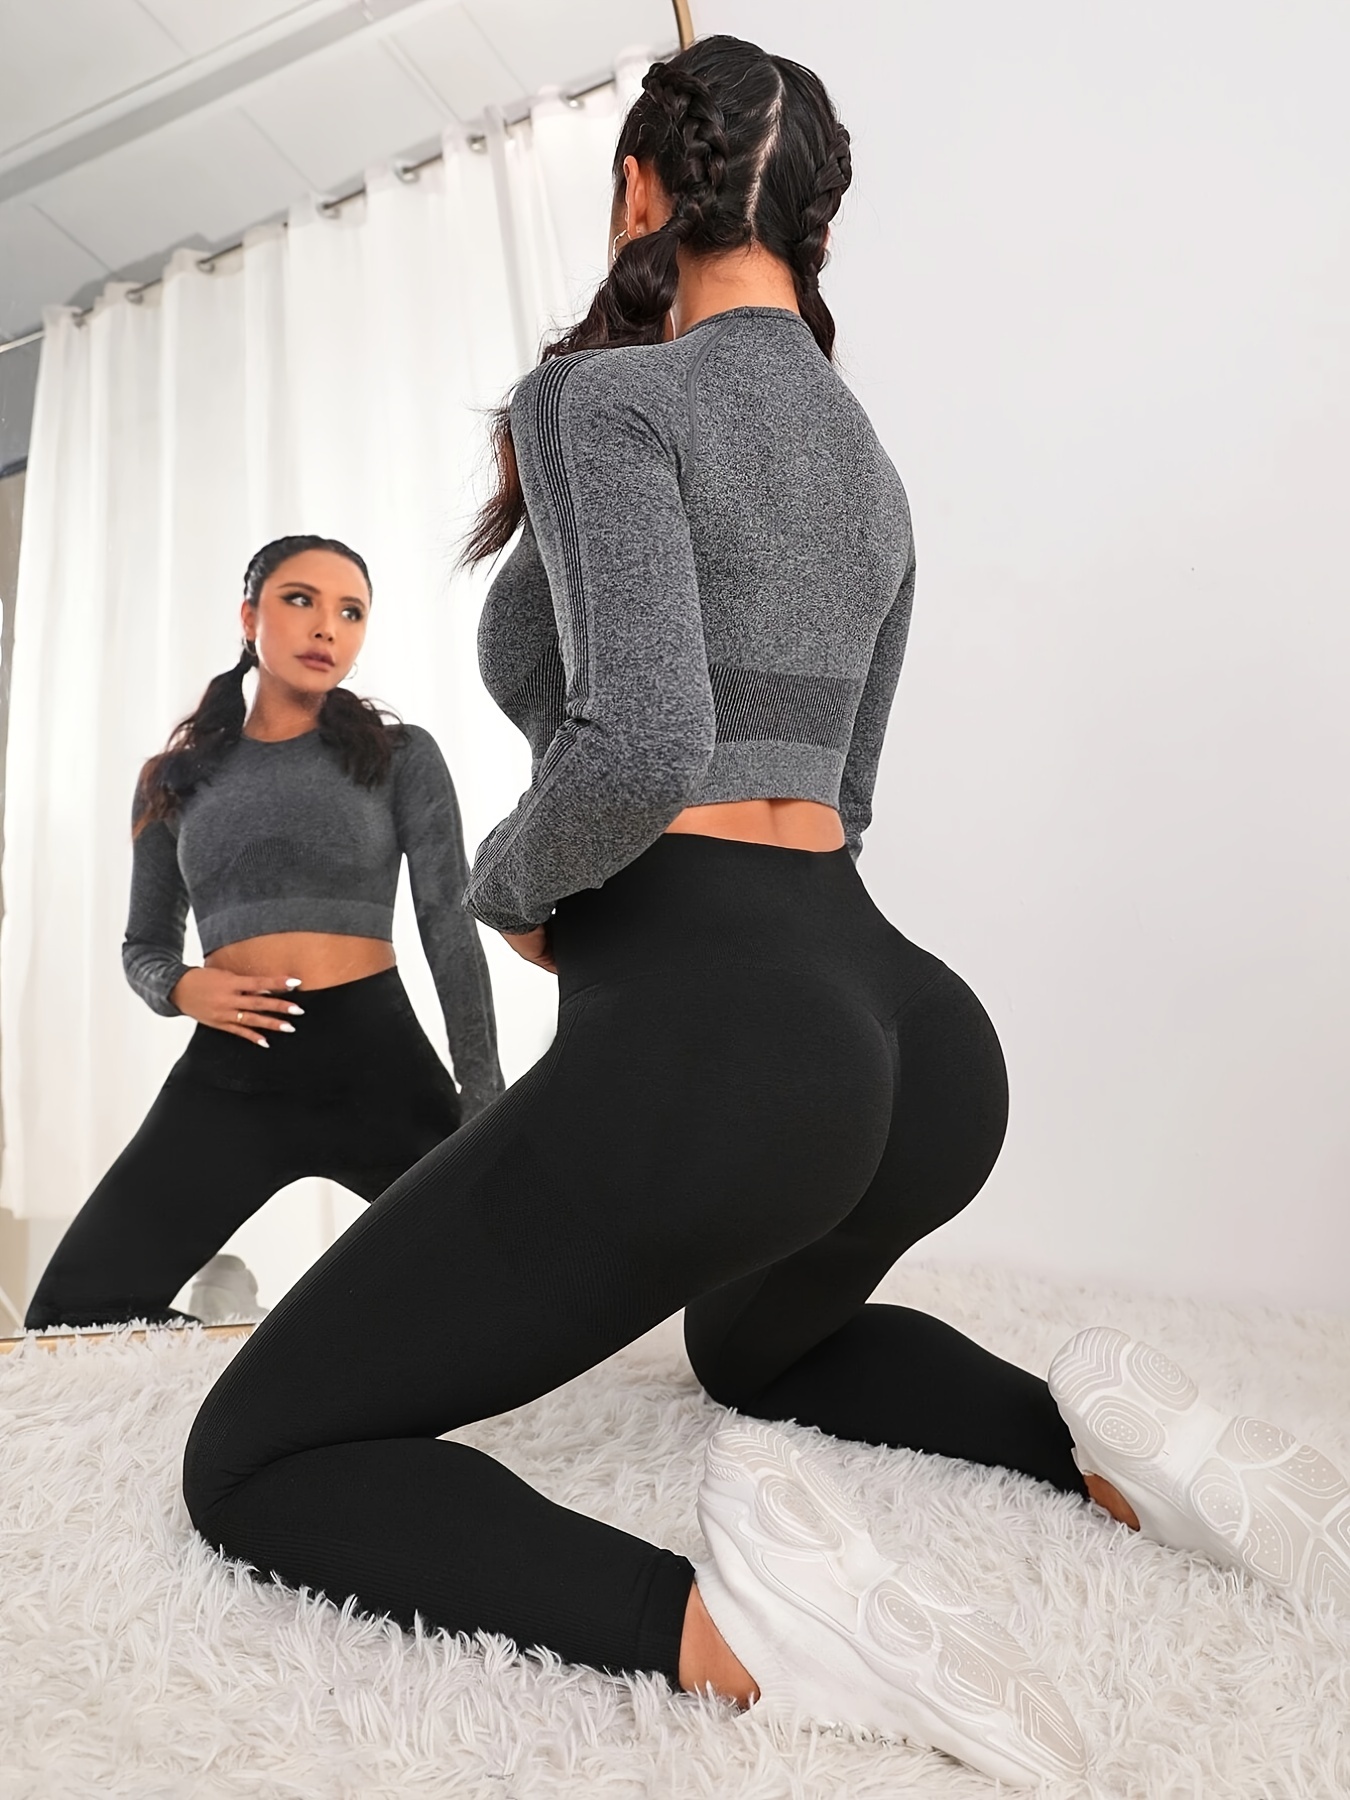 Women's Black Butt Lifting Yoga Leggings - High Stretch Ankle Length Pants  for Enhanced Comfort and Performance in Sports and Fitness Activities